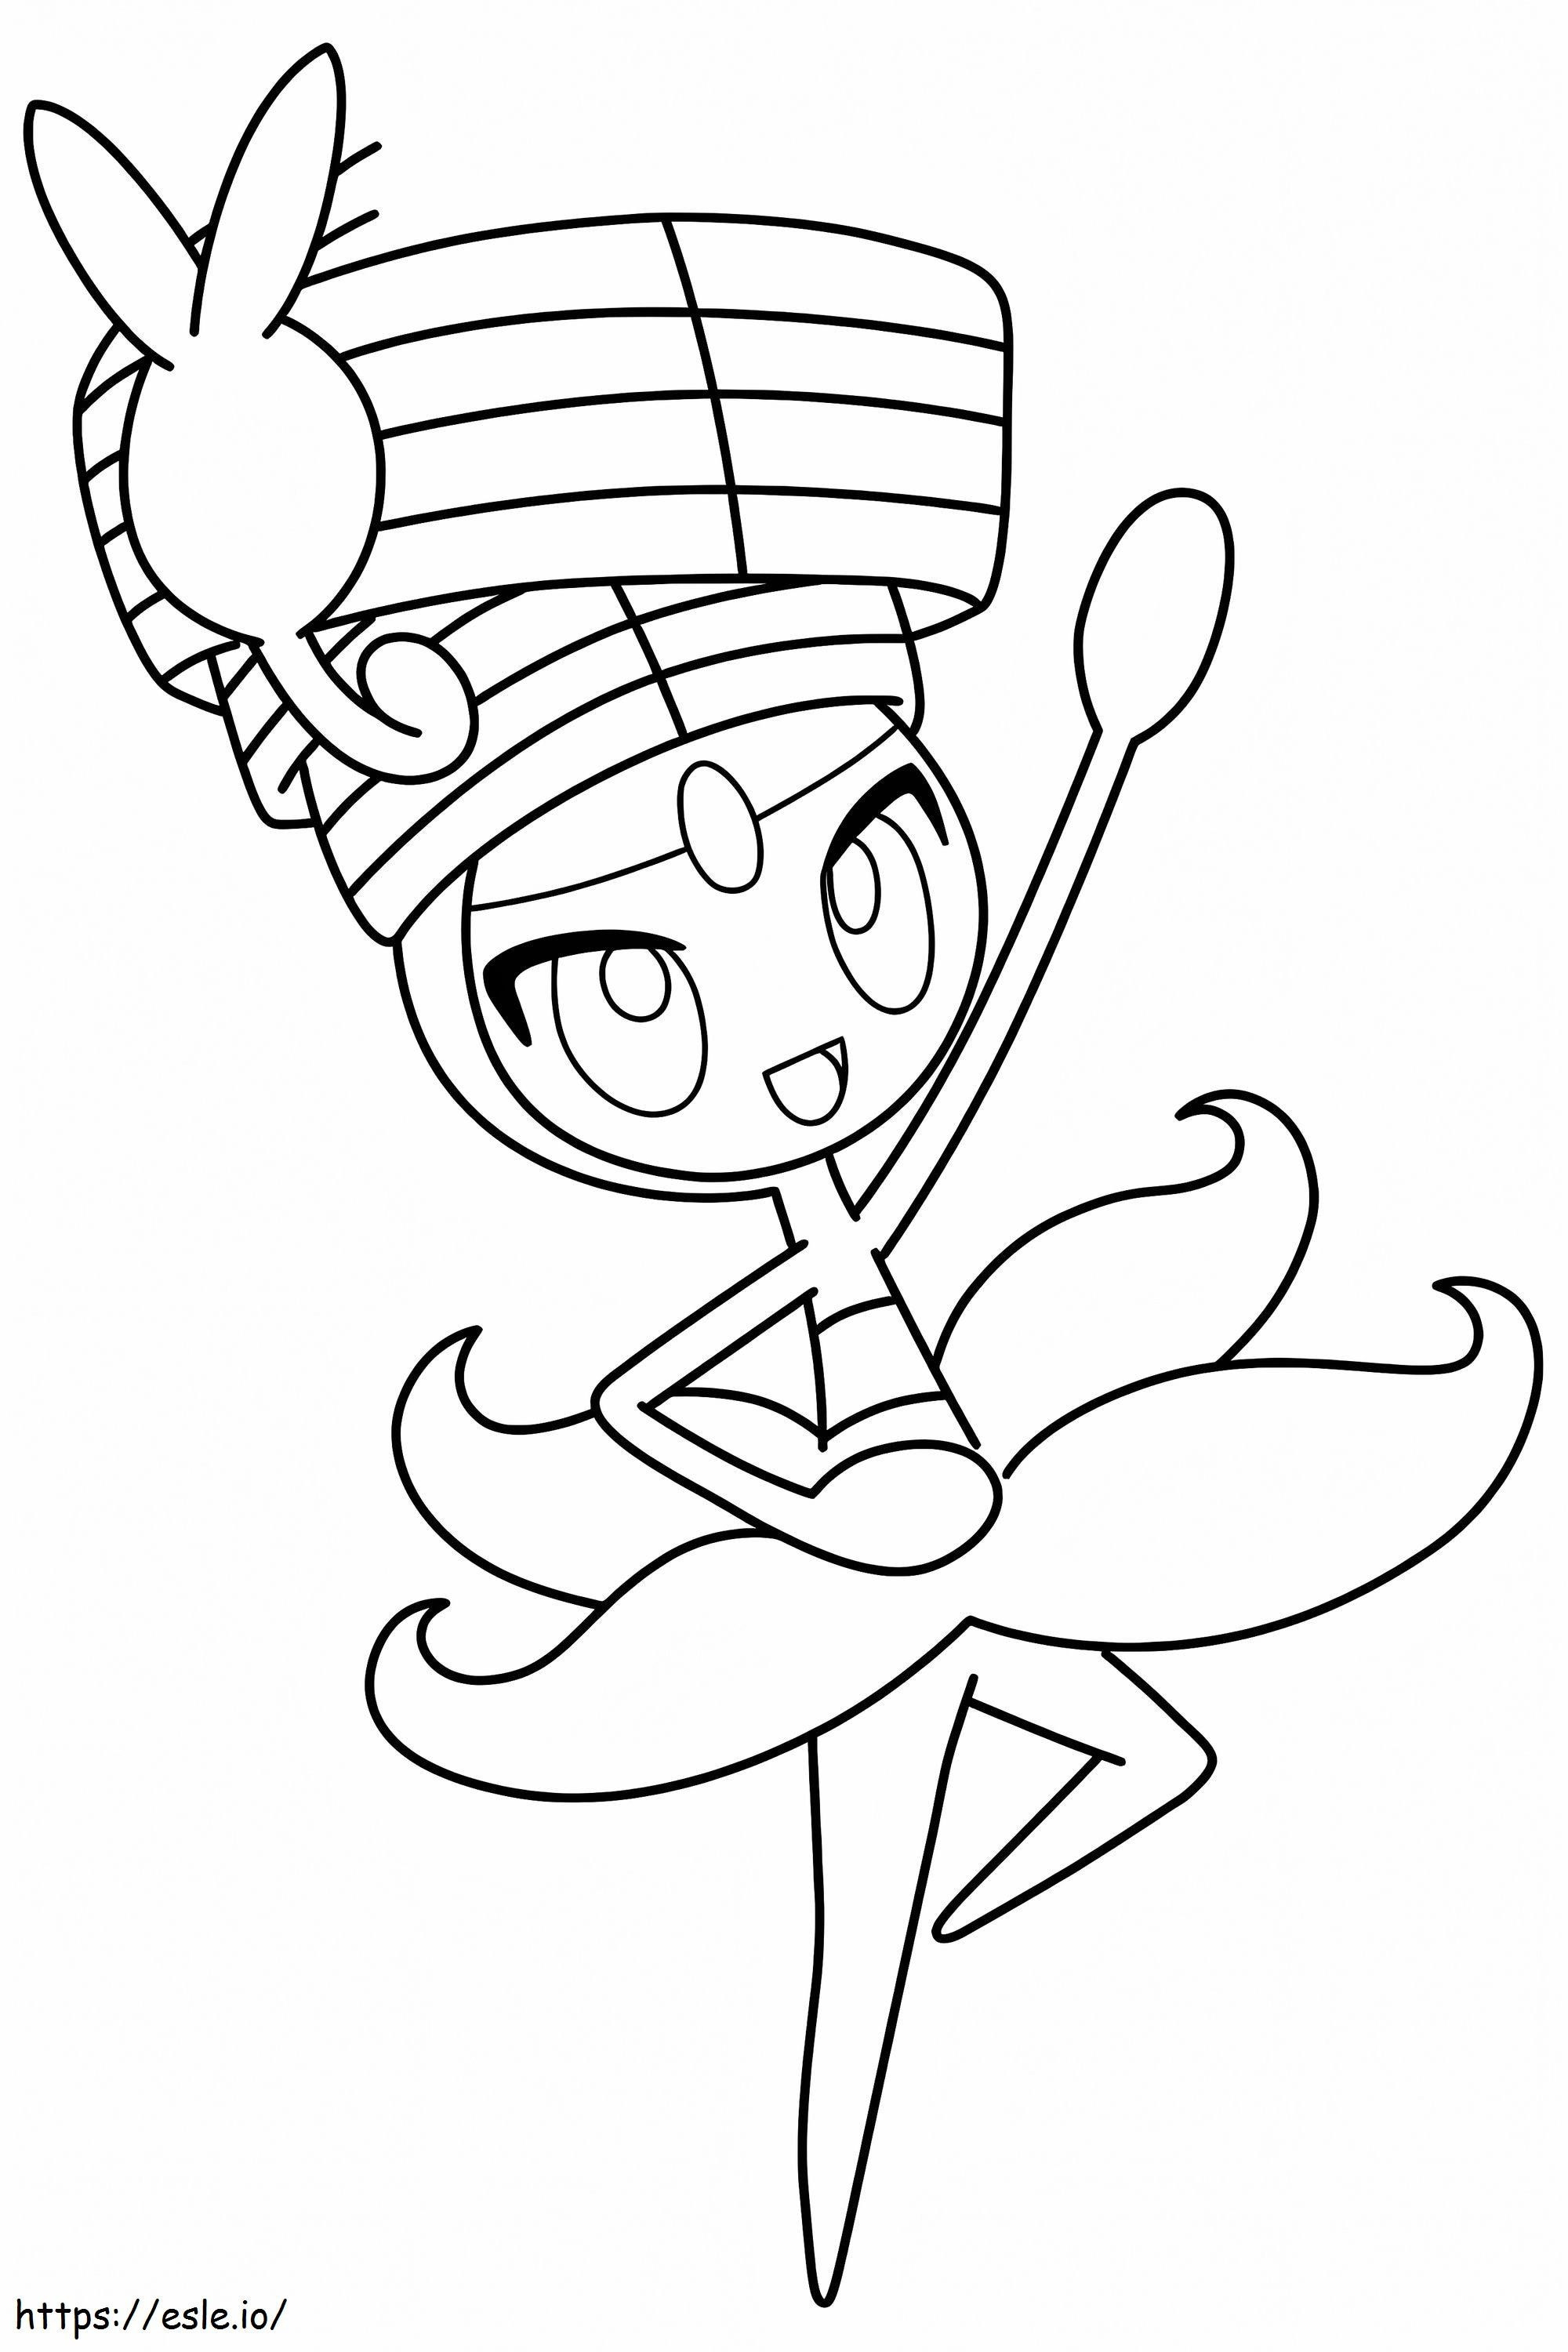 Meloetta Pirouette Form coloring page